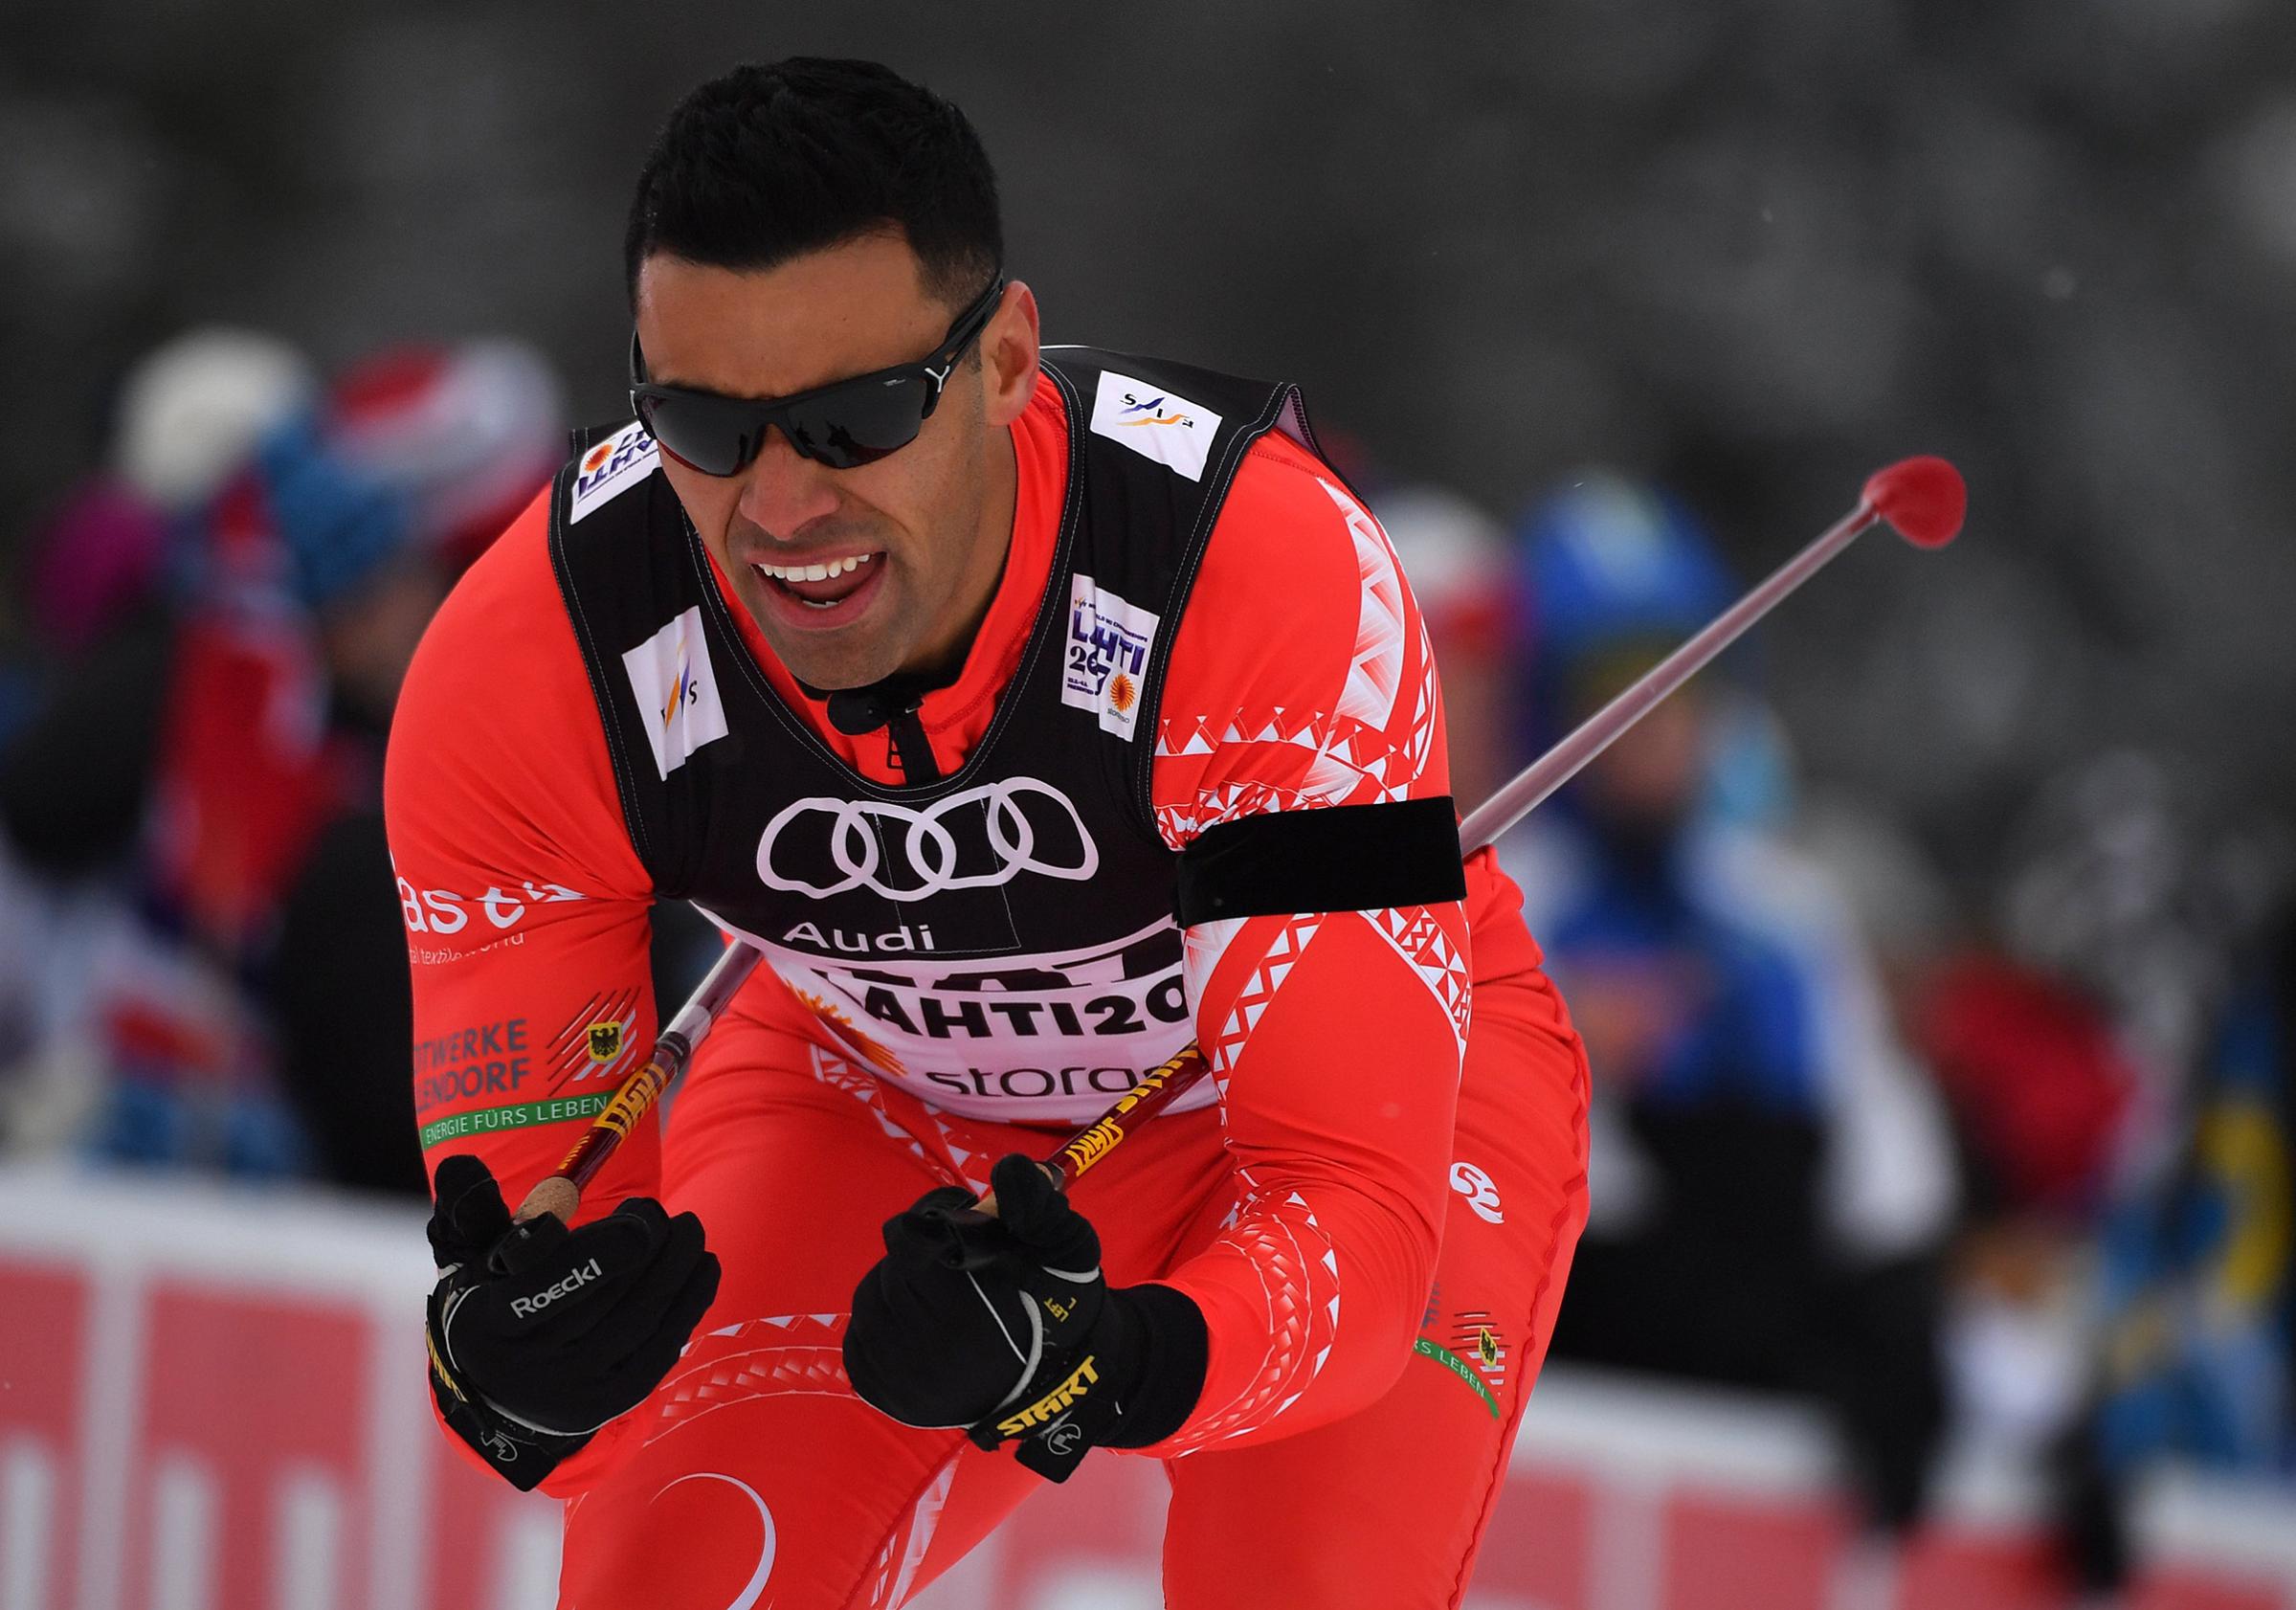 Tonga's Pita Taufatofua competes in the men's cross country sprint qualification at the 2017 Nordic Skiing World Championships in Lahti, Finland.